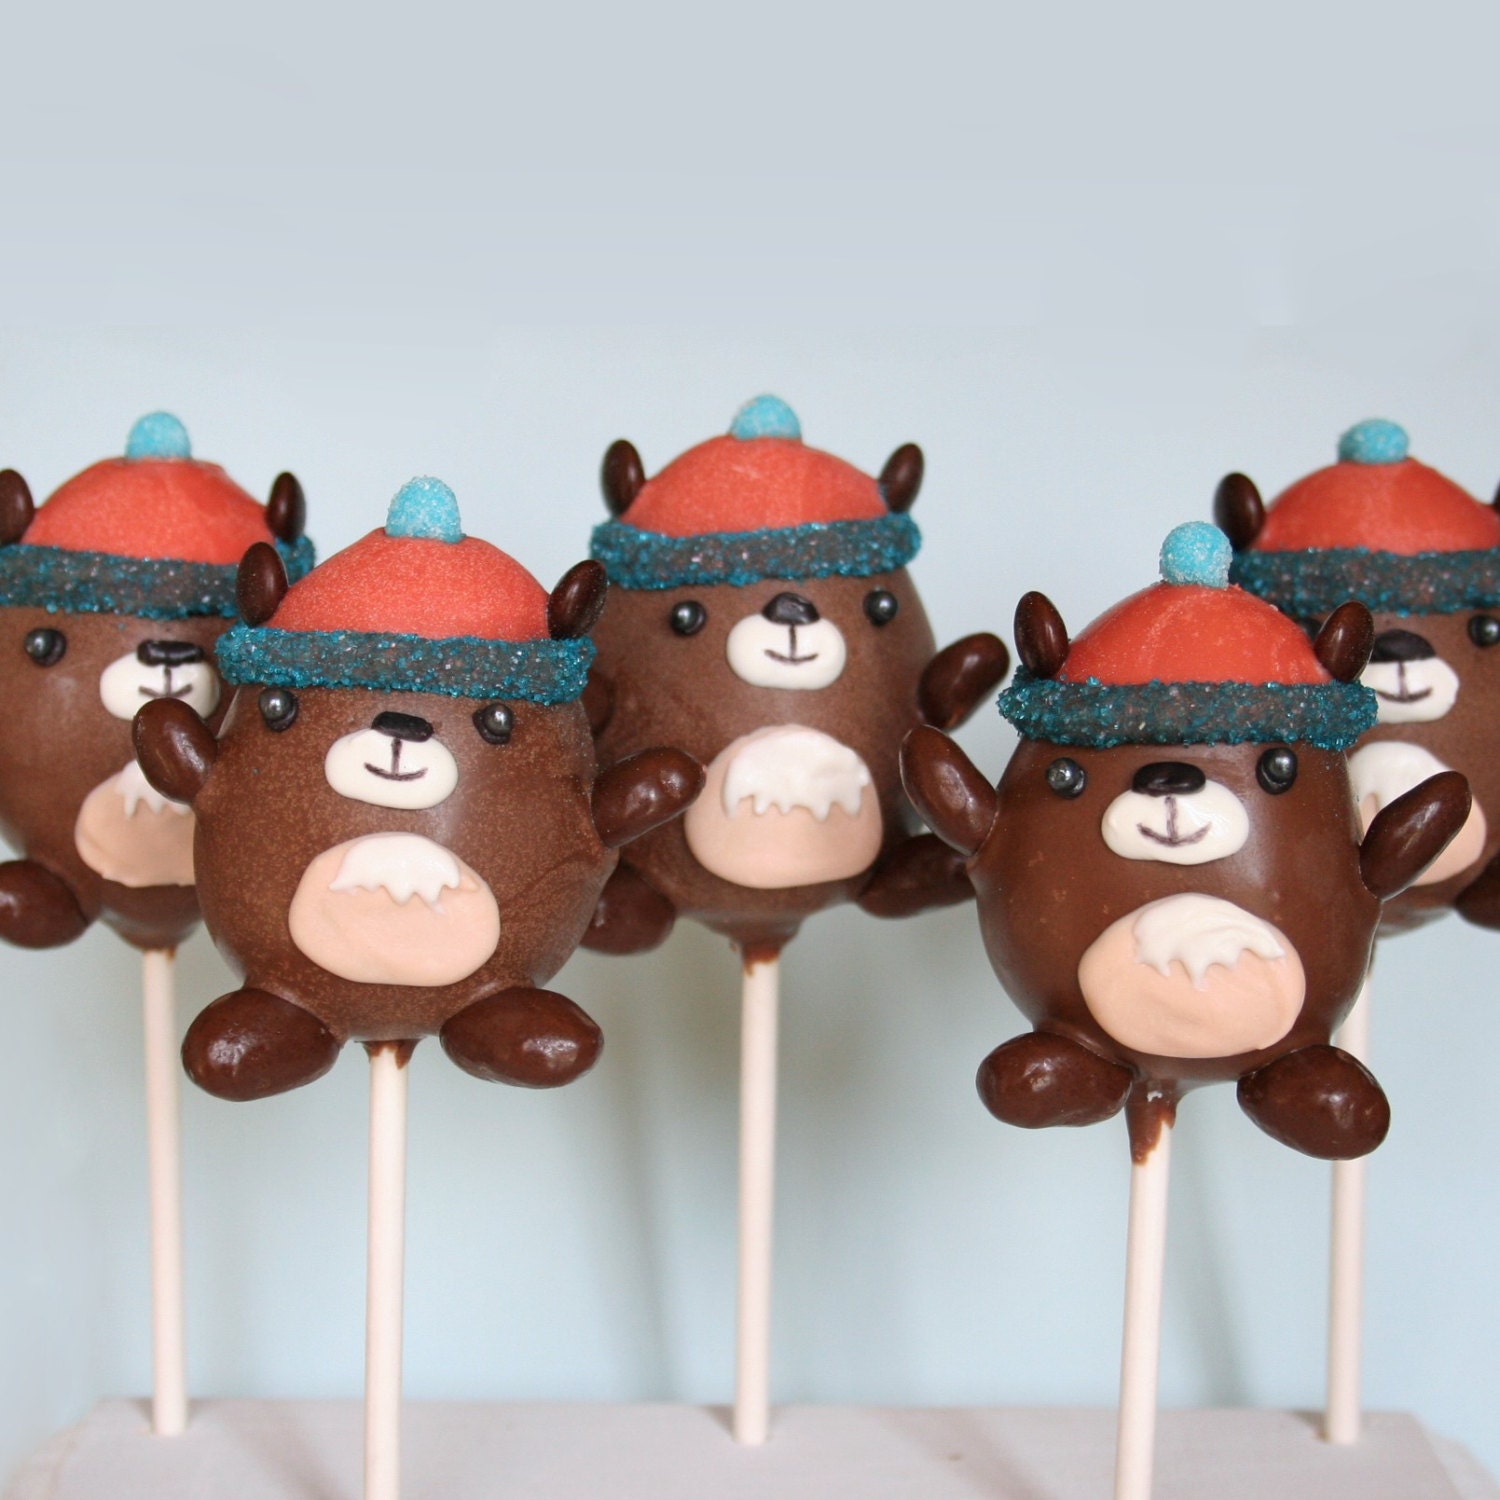 12 Groundhog Cake Pops, party favors for Groundhog Day, Feb 2nd, inspired by MukMuk the Marmont, the Vancouver Winter Olympics mascot